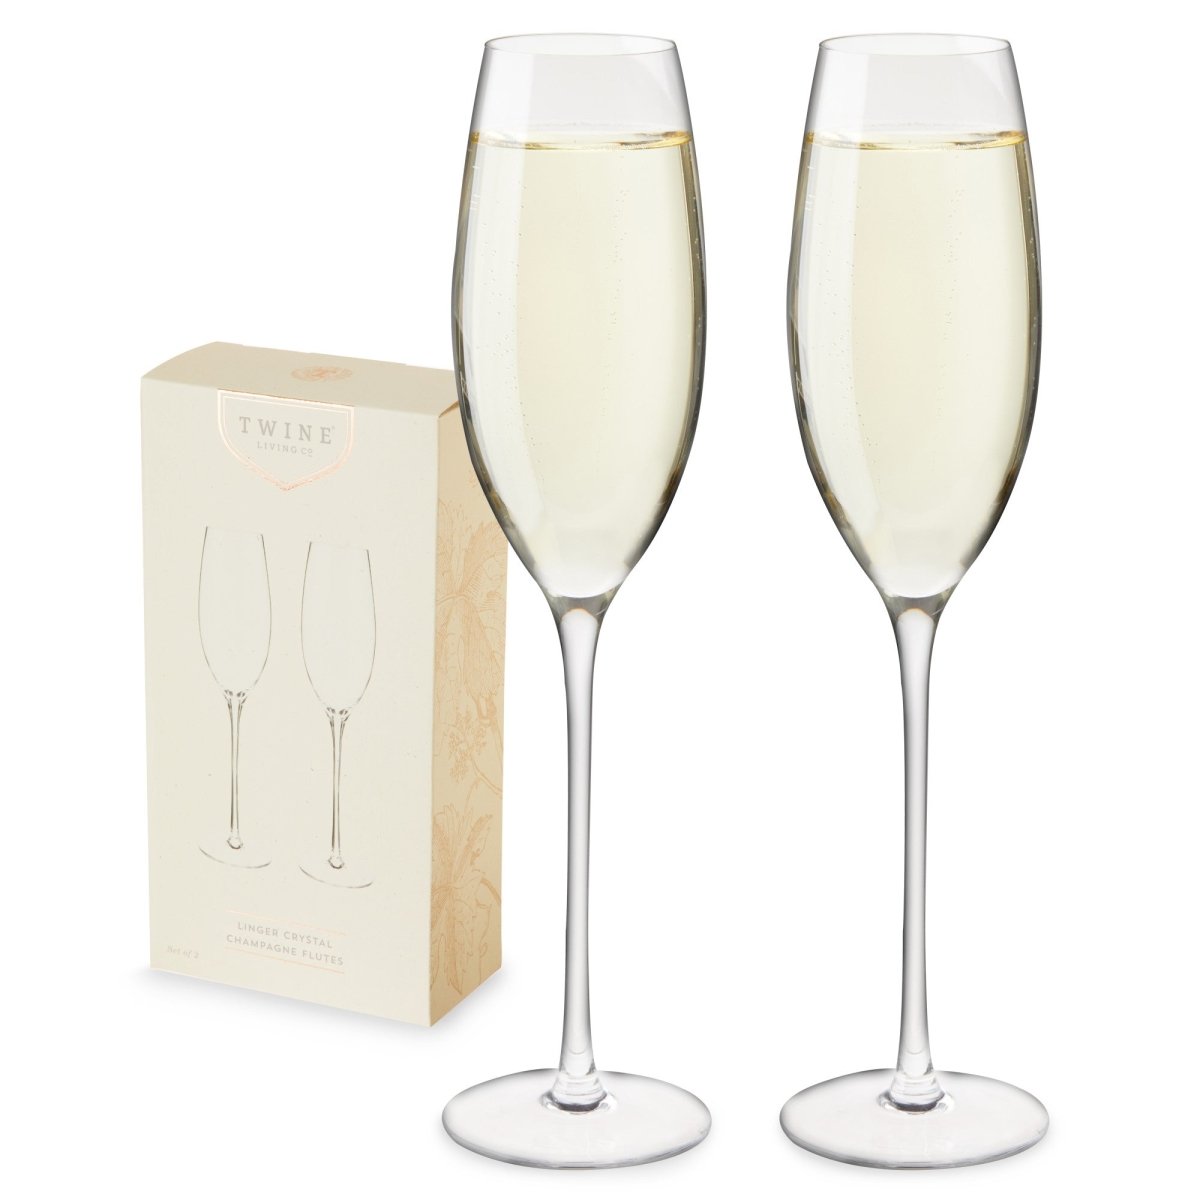 Luster Stemless Champagne Flute Set by Twine